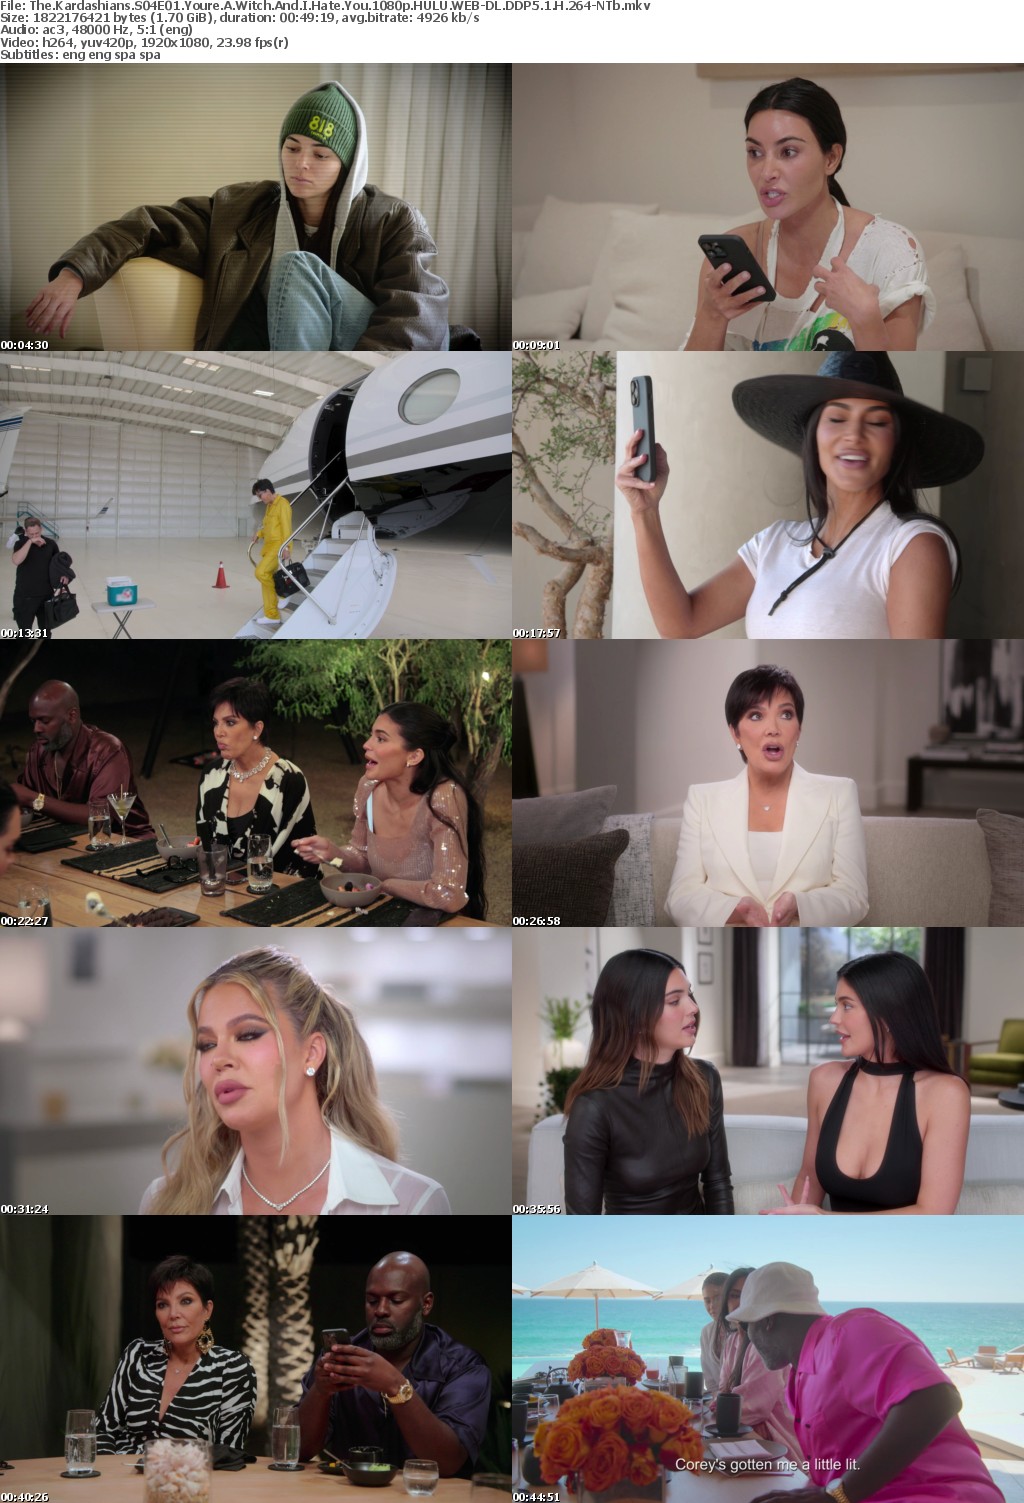 The Kardashians S04E01 Youre A Witch And I Hate You 1080p HULU WEB-DL DDP5 1 H 264-NTb